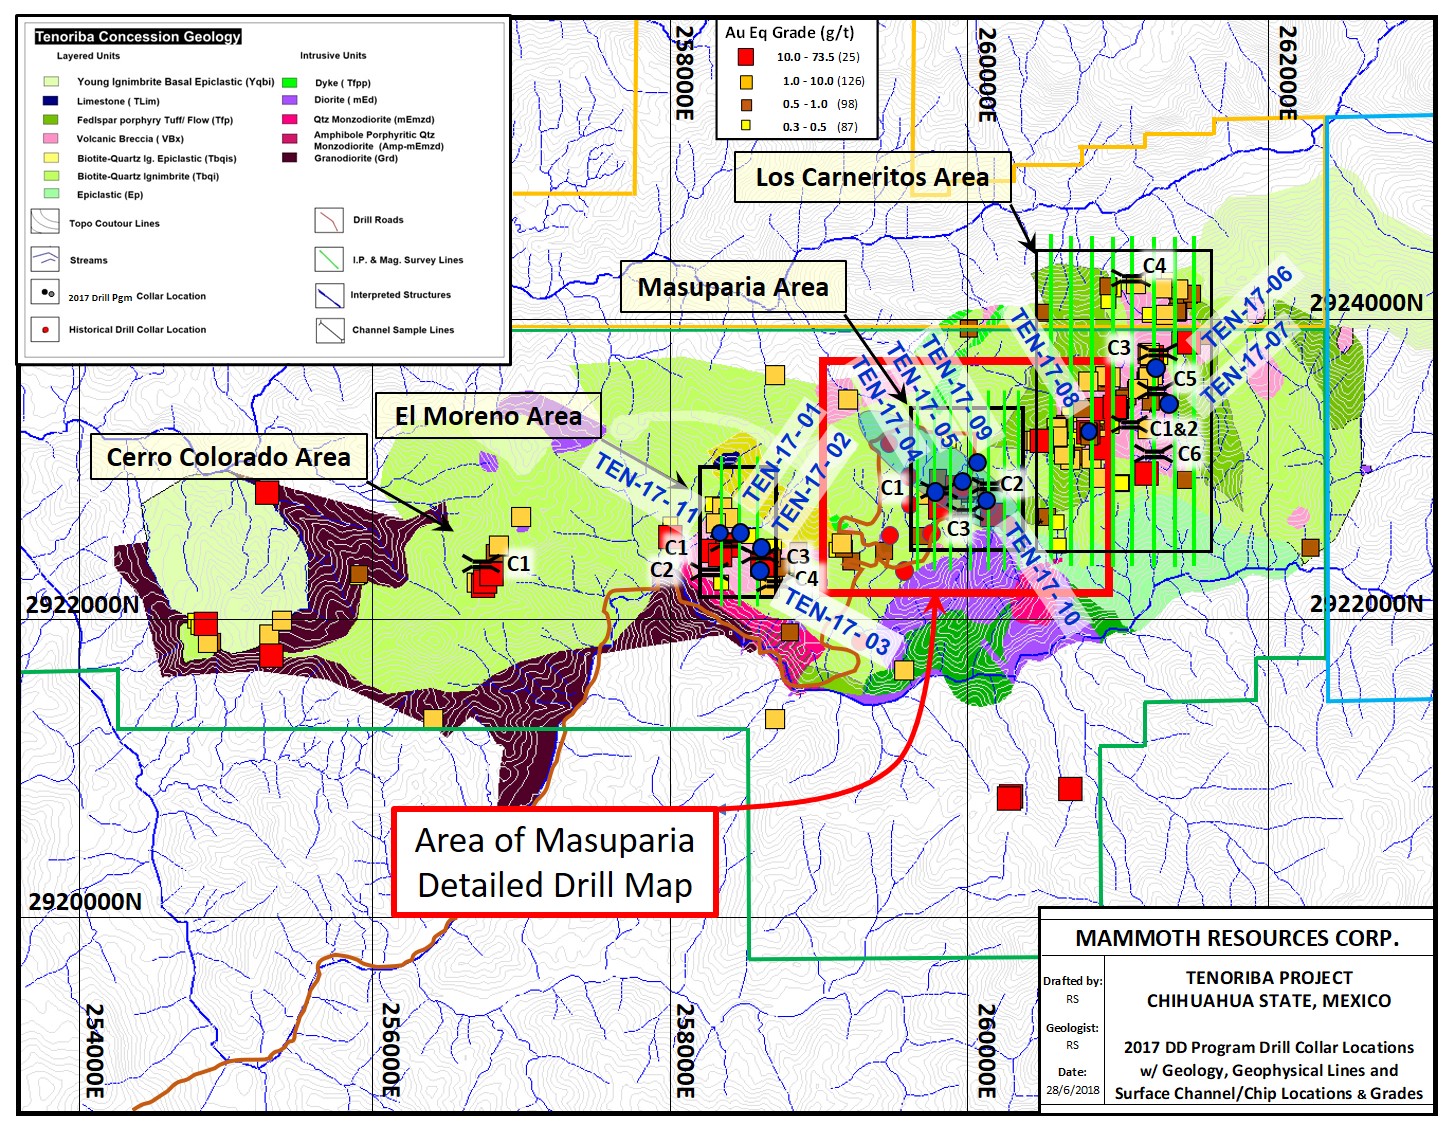 Maps, Images & Photos | Mammoth Resources Corp.